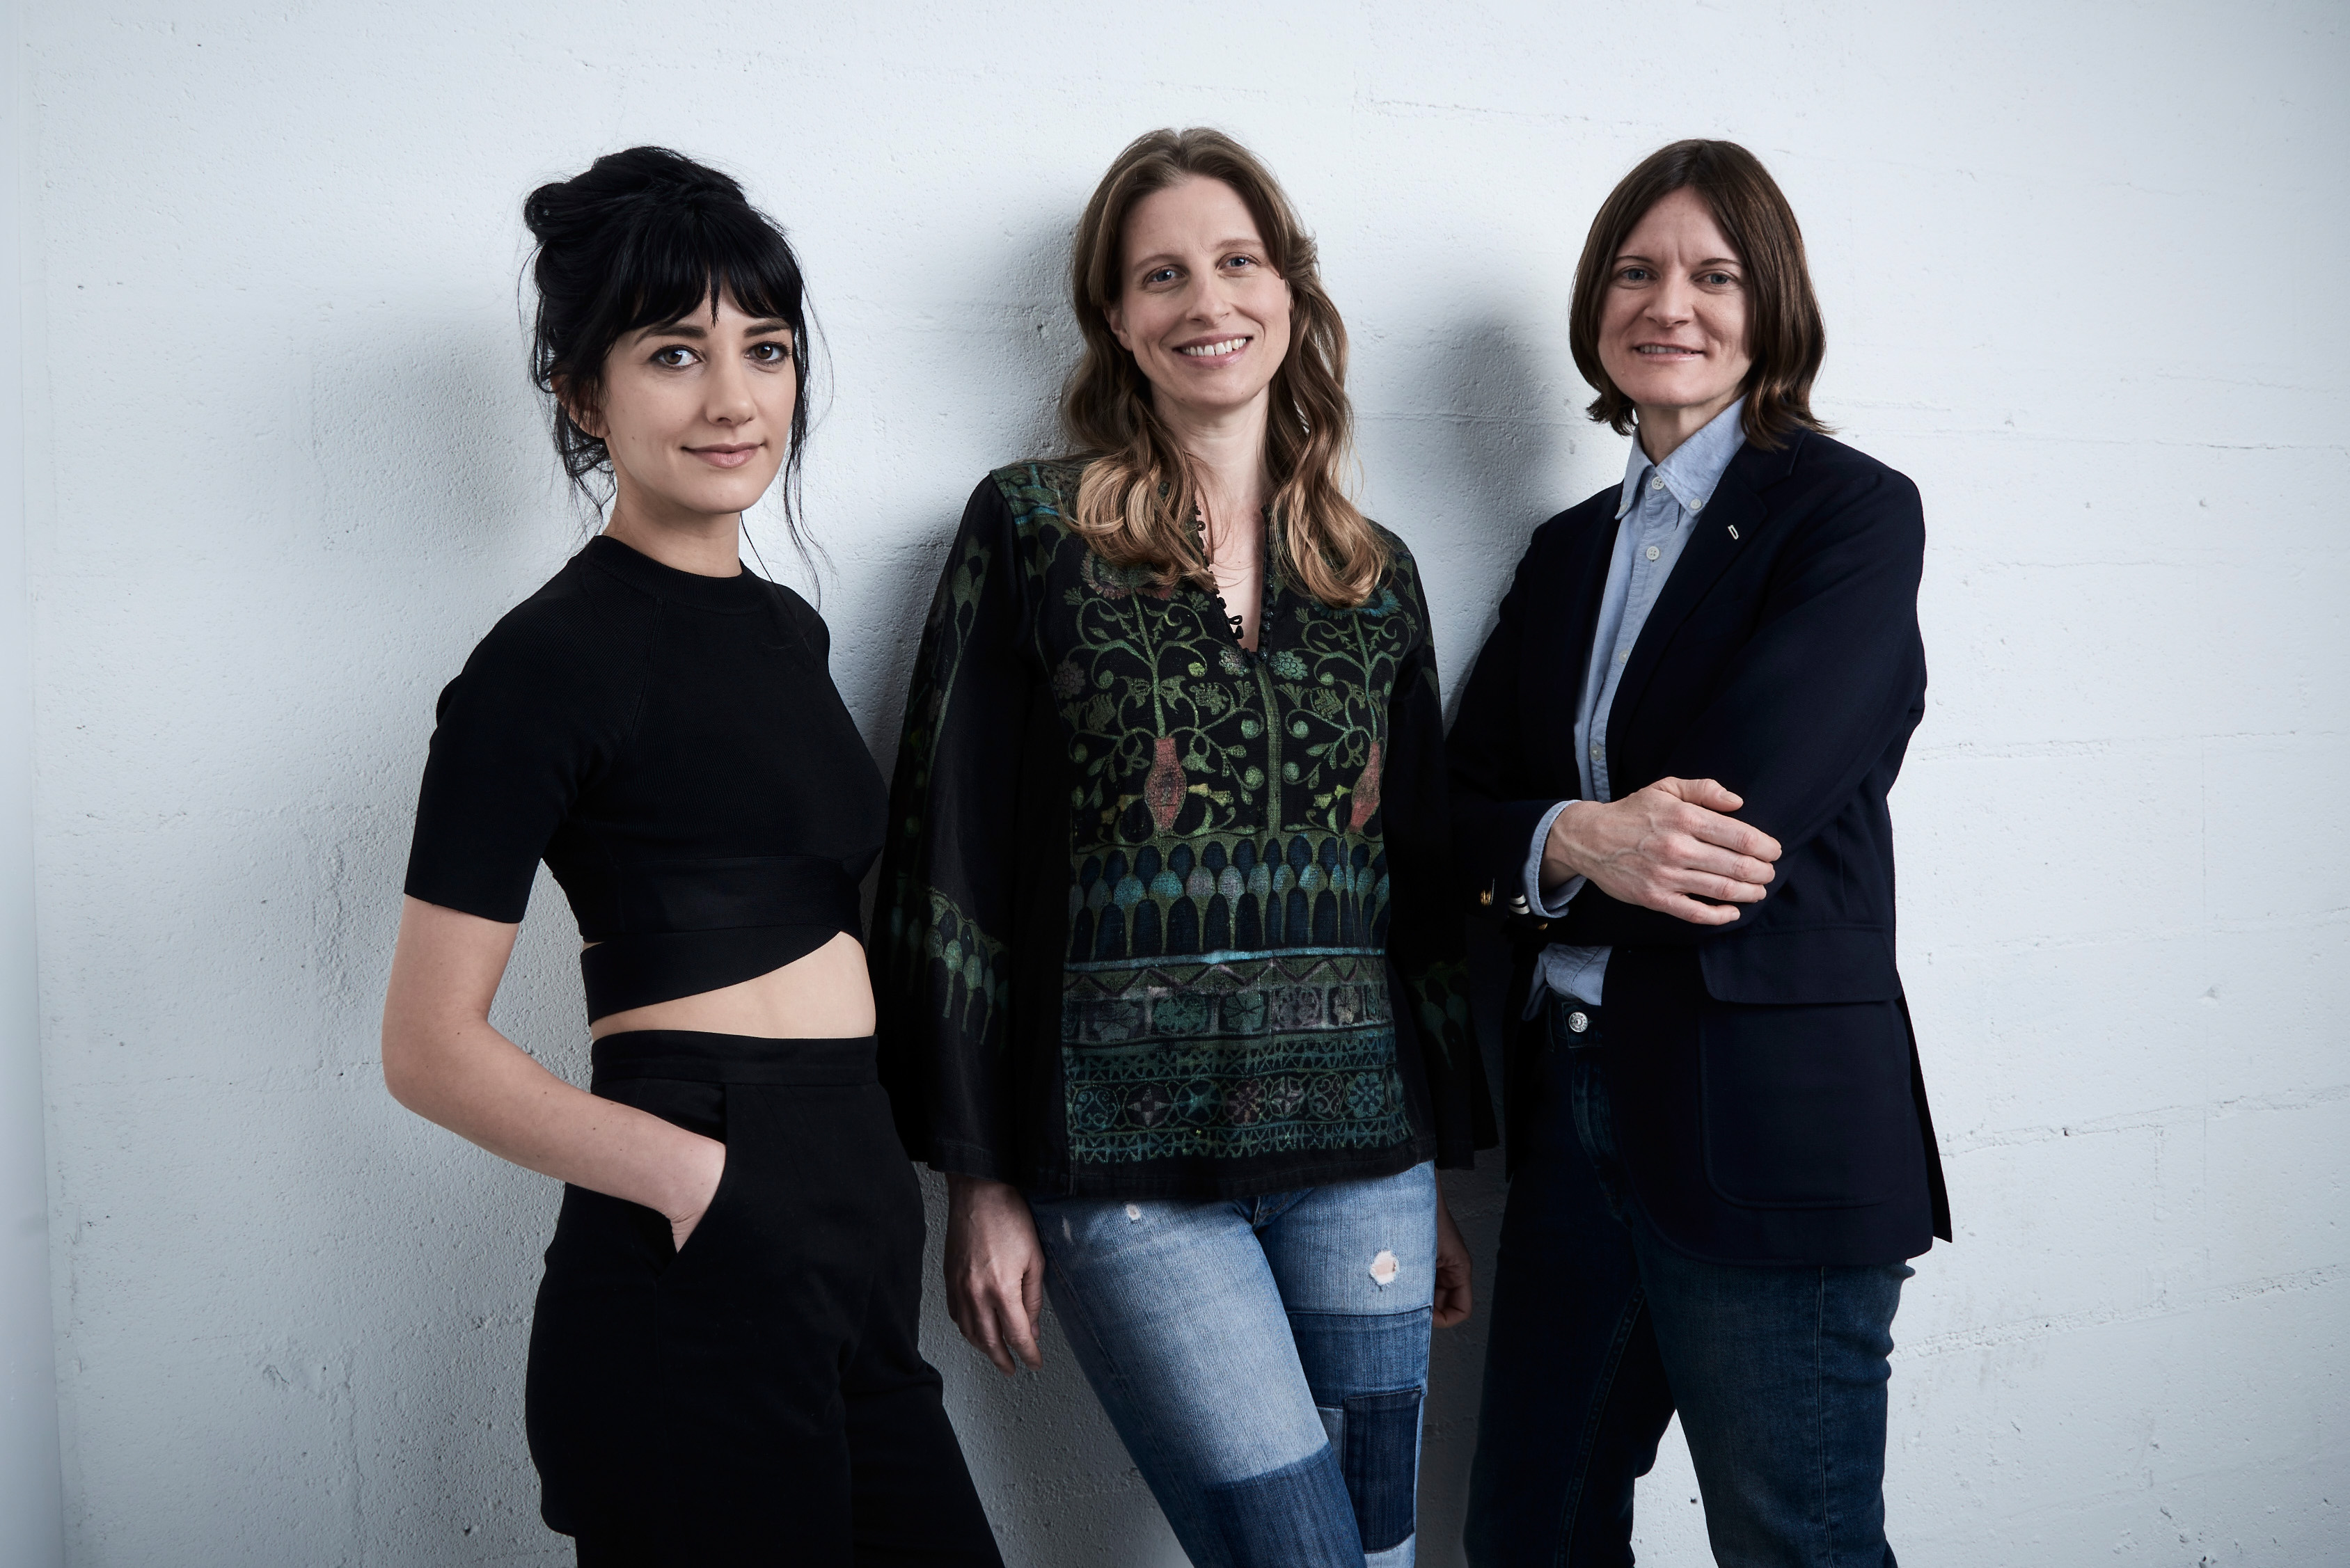 Actress Sheila Vand, actress Ann Carr, and director Ingrid Jungermann from 'Women Who Kill' pose at the Tribeca Film Festival Getty Images Studio on April 15, 2016 in New York City